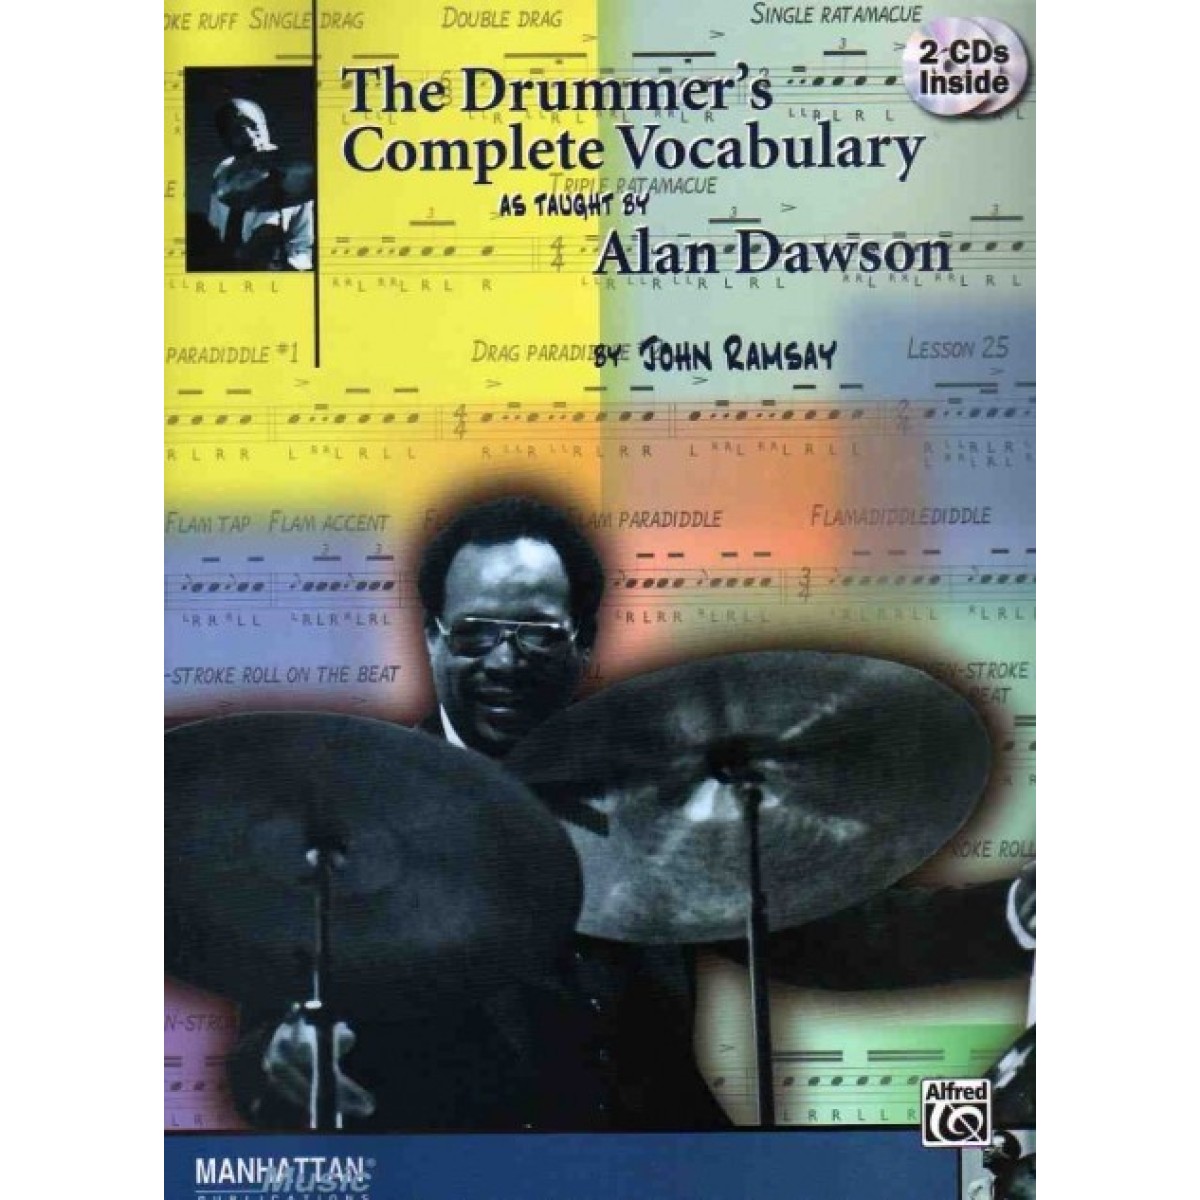 The Drummer's Complete Vocabulary As Taught by Alan Dawson